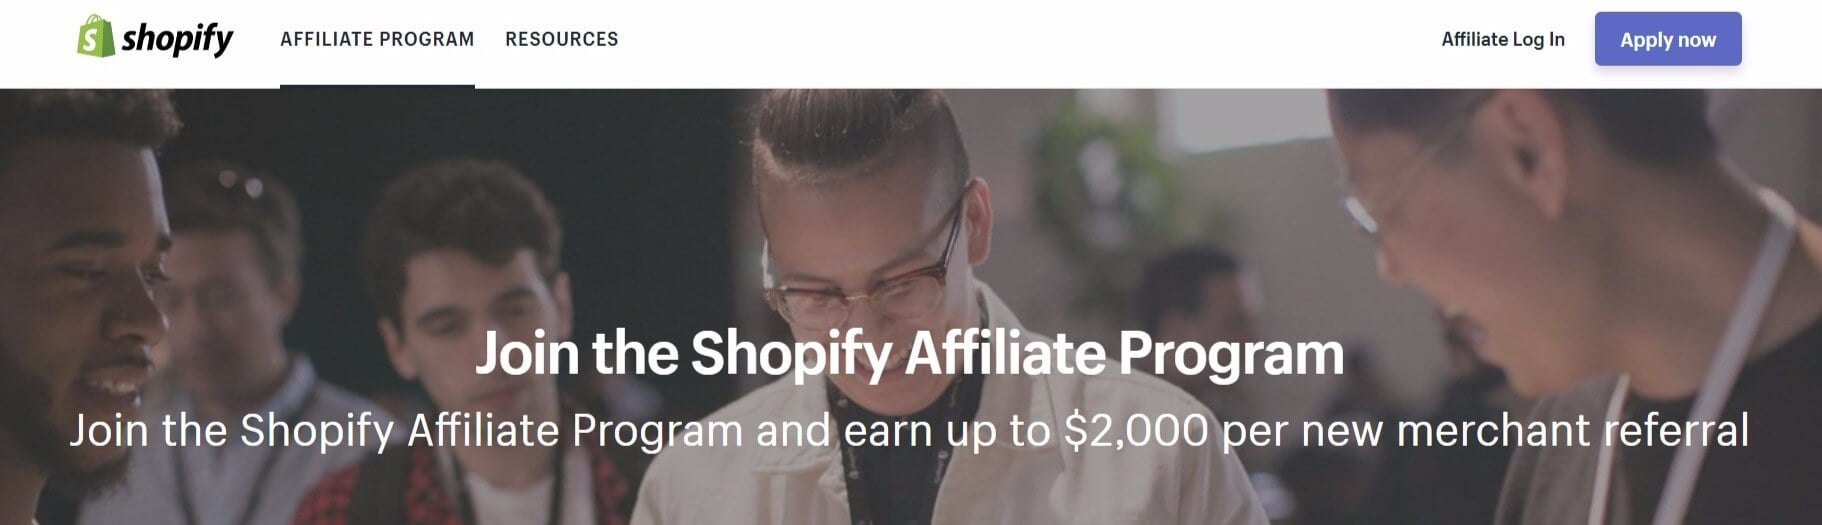 The Shopify affiliate signup page